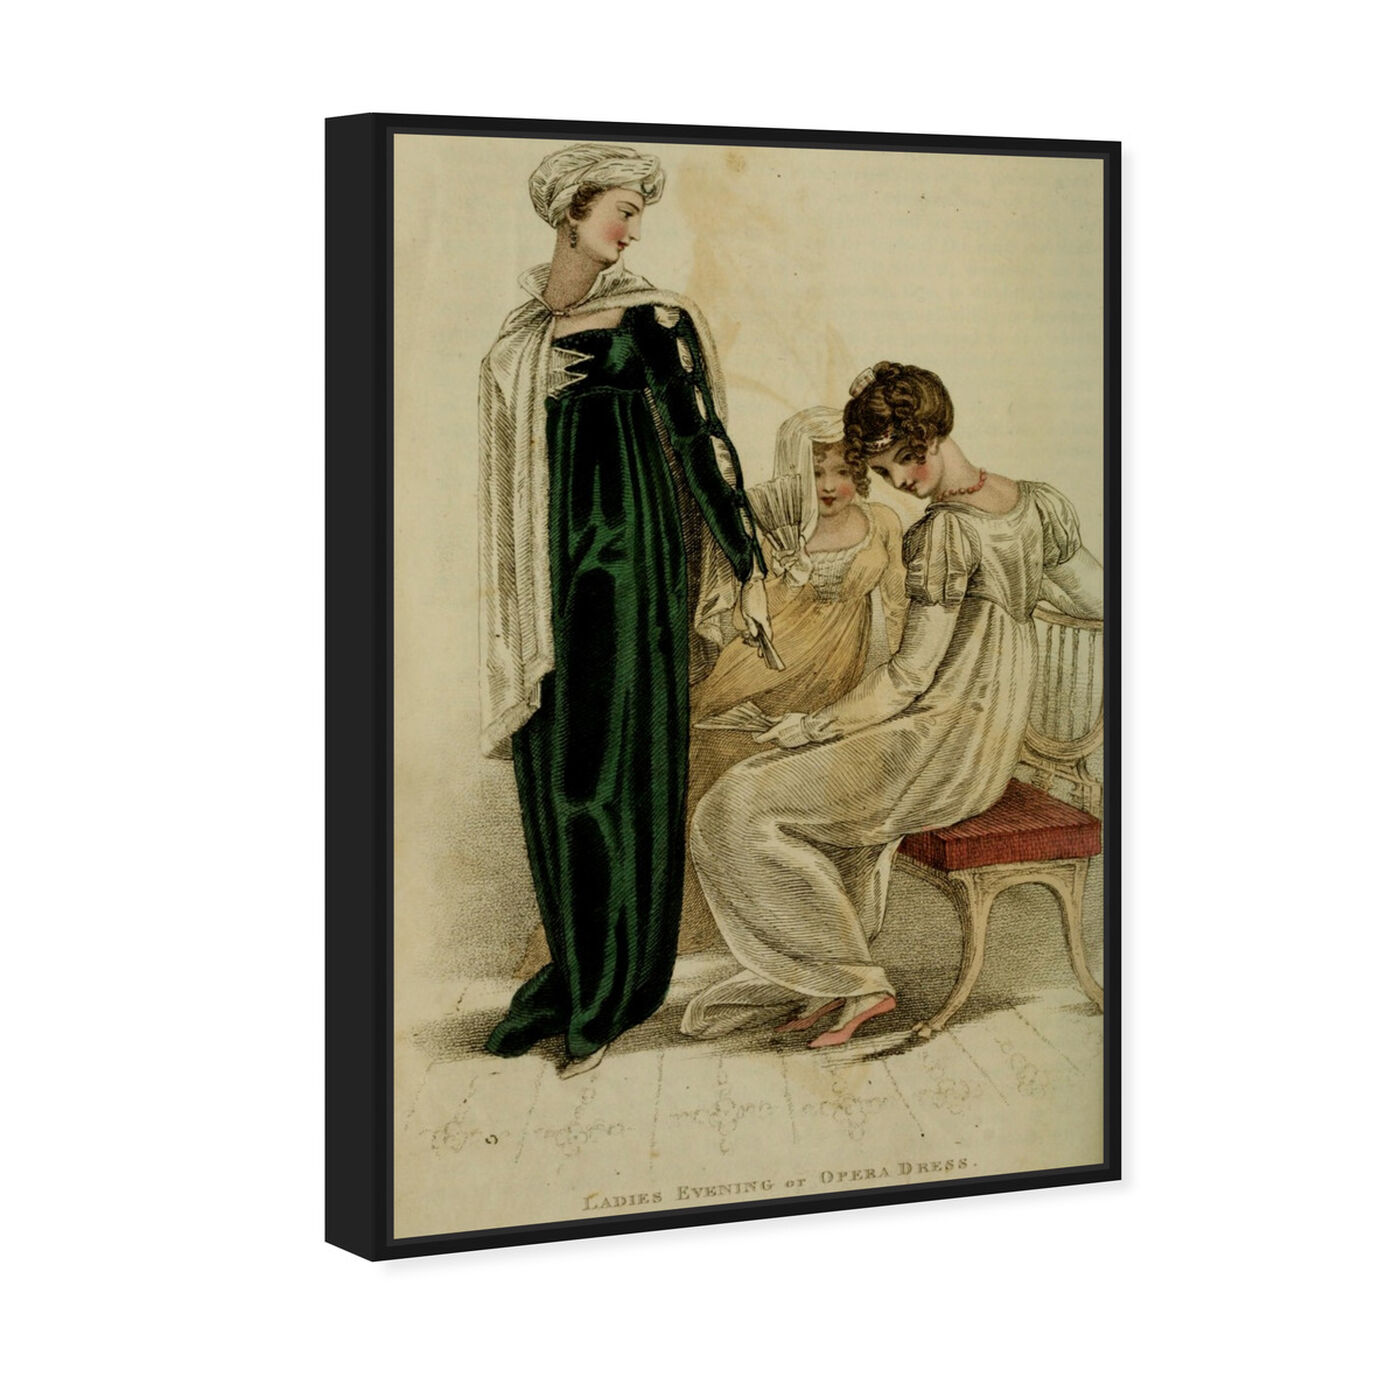 Angled view of Opera Dress - The Art Cabinet featuring classic and figurative and realism art.